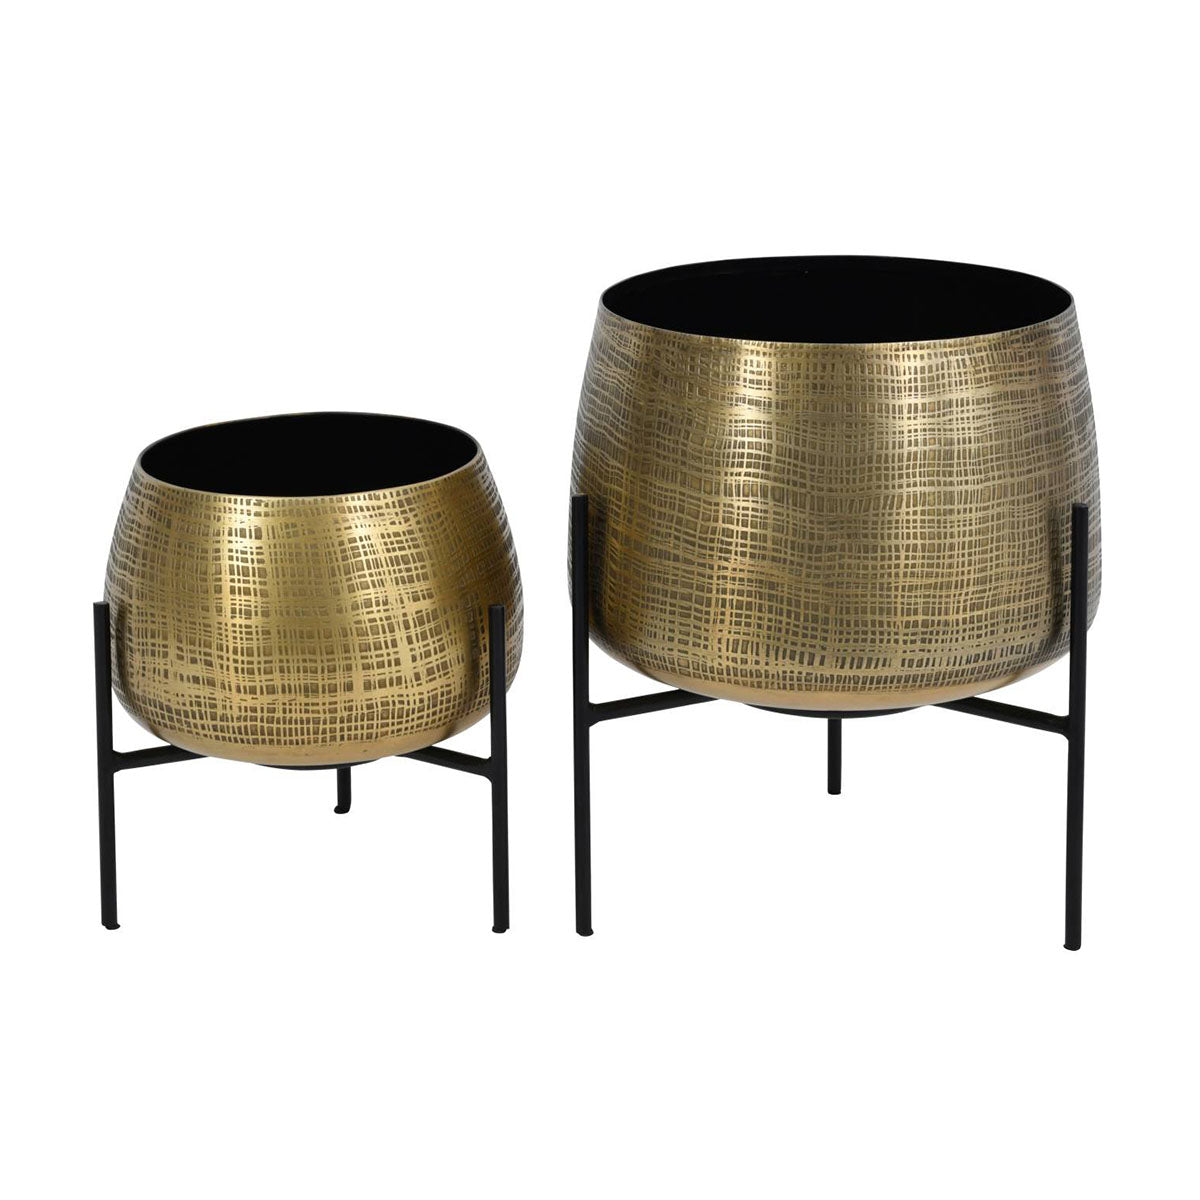 Clyde Tabletop Brass Set of 2 Planters on Black Stands